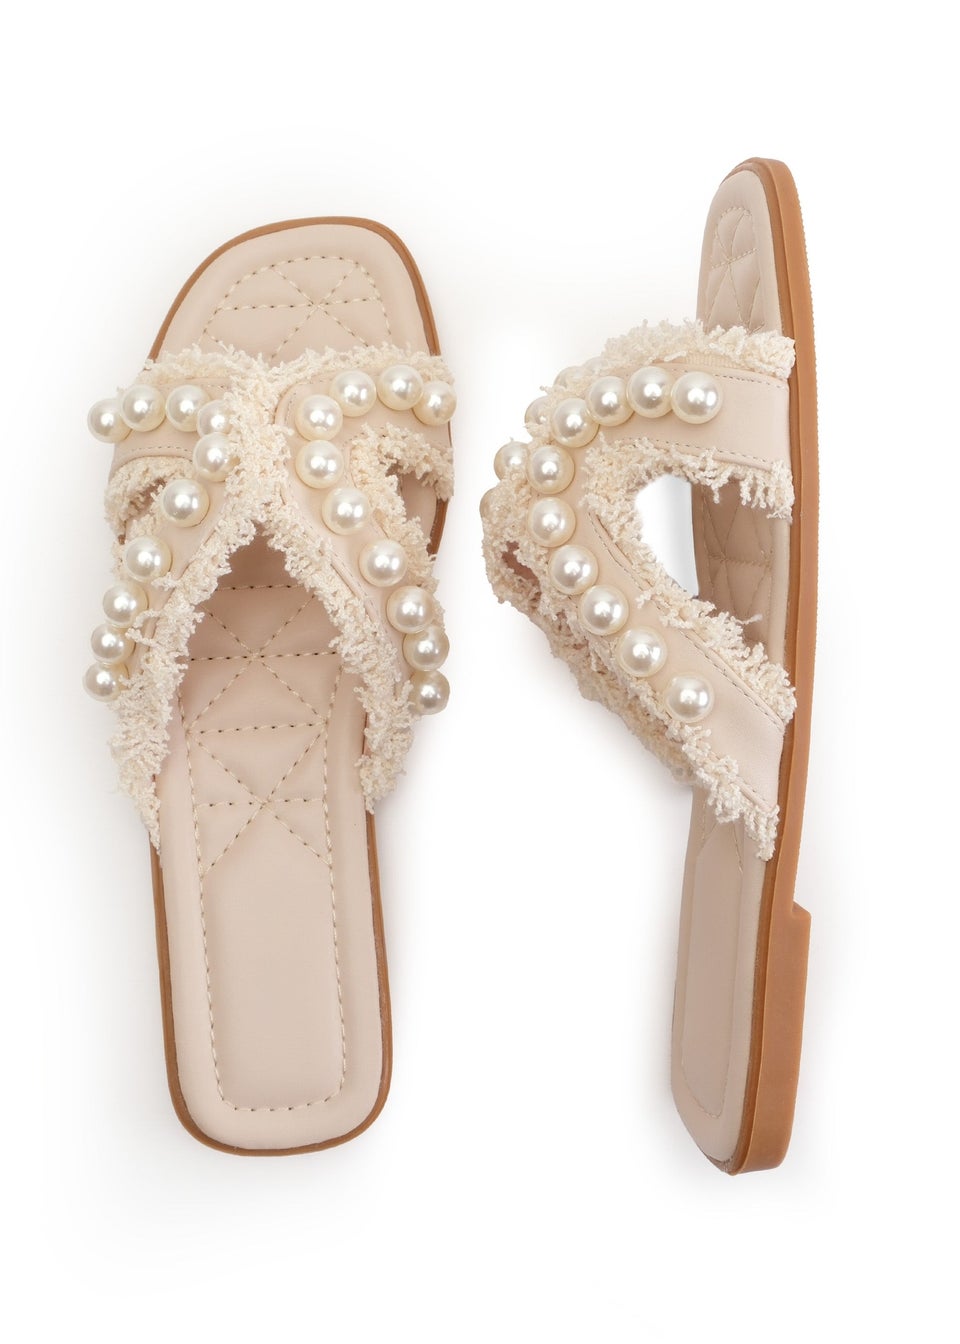 Where's That From Nude Pu Vivienne Sandal With Pearl Detail